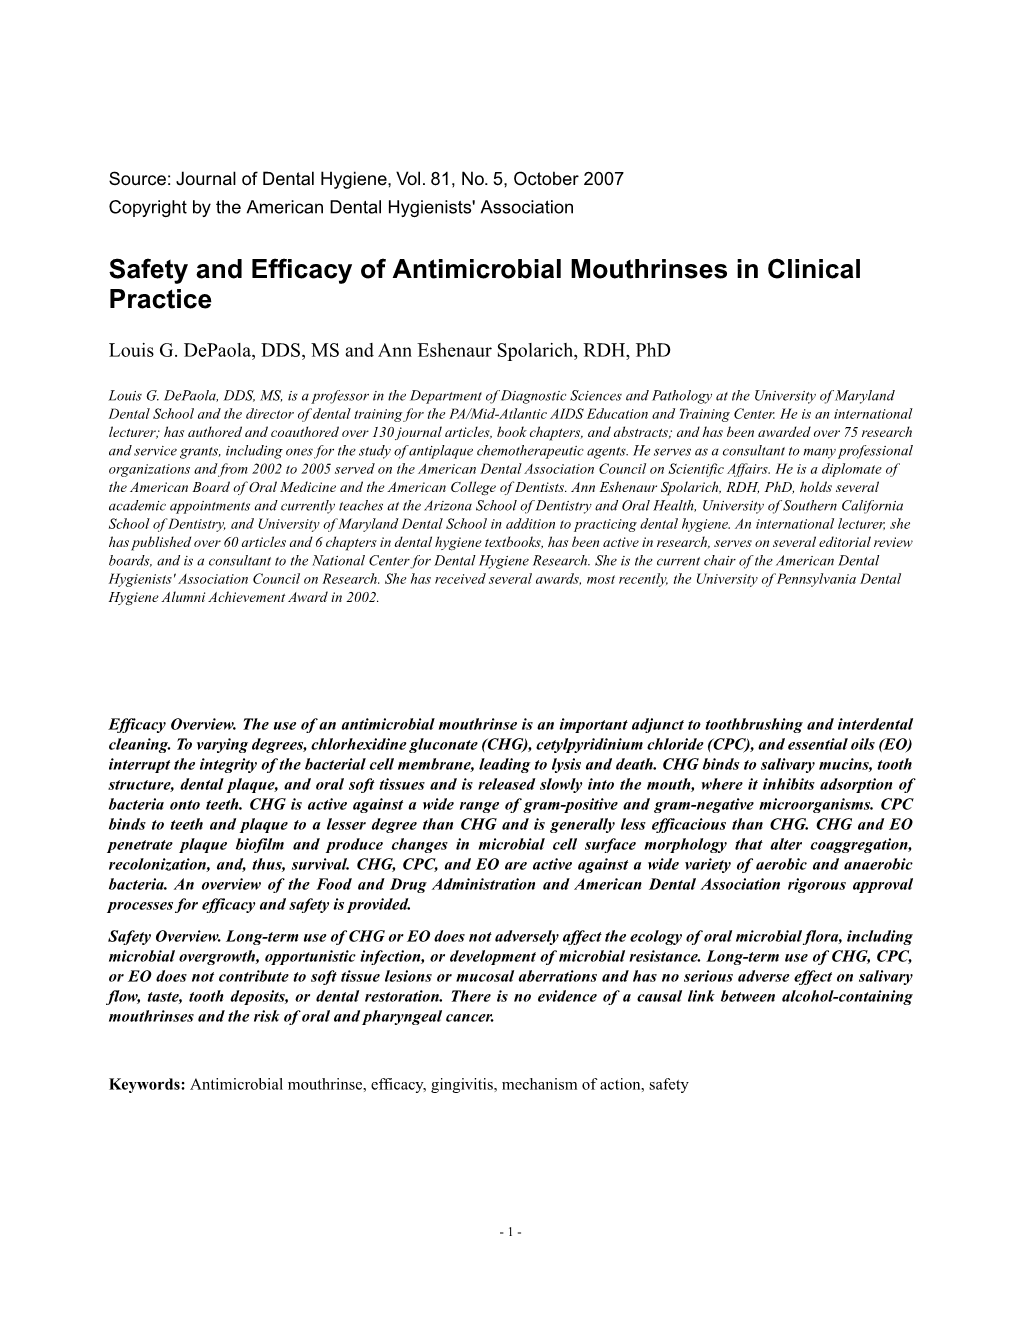 Safety and Efficacy of Antimicrobial Mouthrinses in Clinical Practice